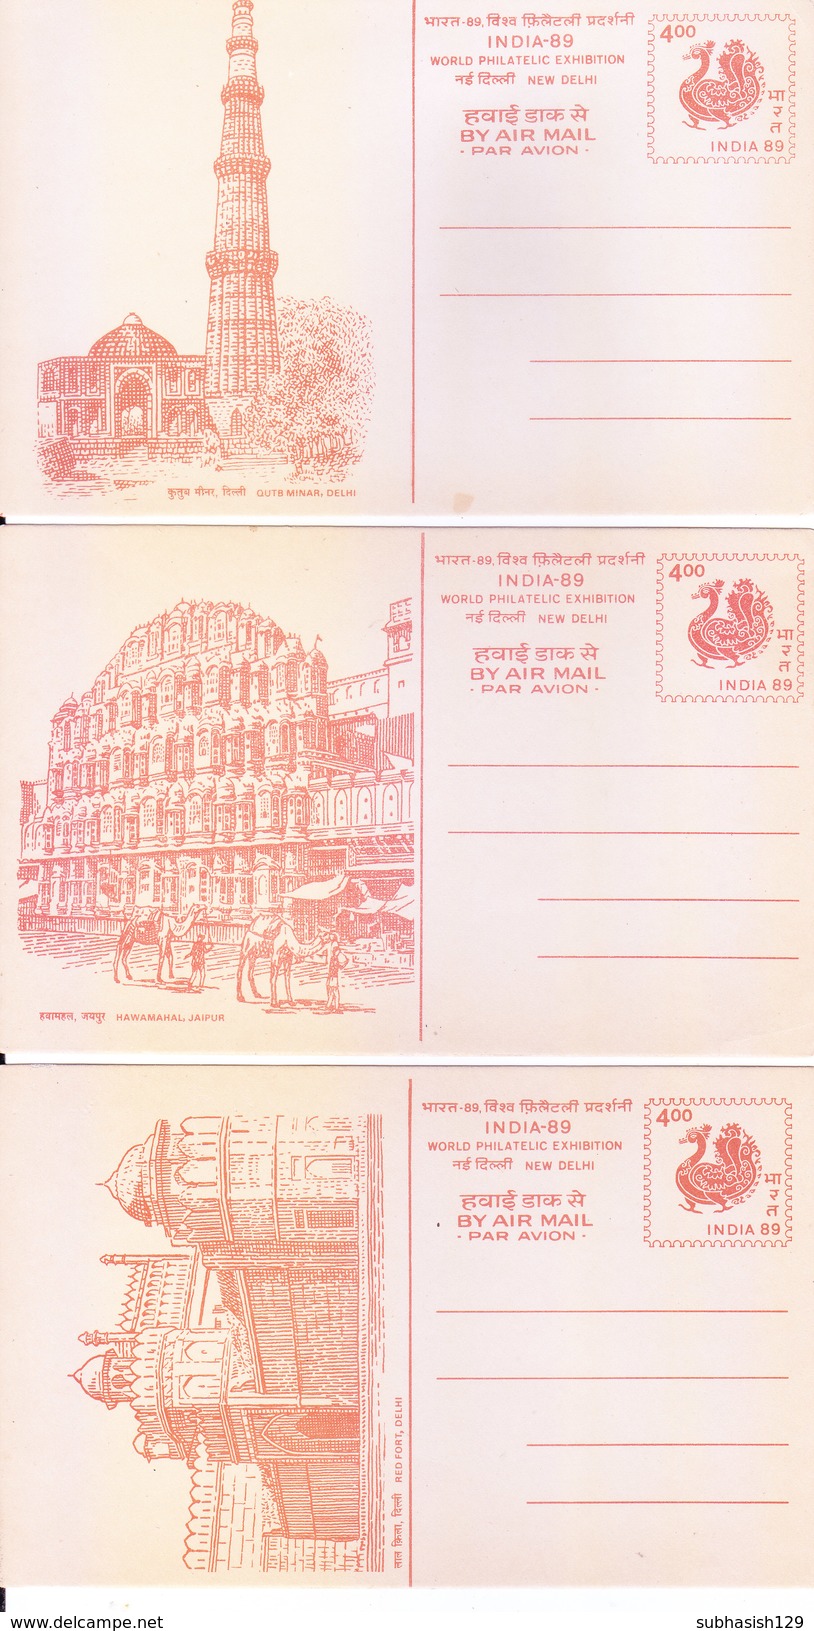 INDIA - 1989 SET OF 7V COMMEMORATIVE POST CARD ISSUED ON THE OCASSION OF INDIA 1989 WORLD PHILATELIC EXHIBITION - UNUSED - Covers & Documents